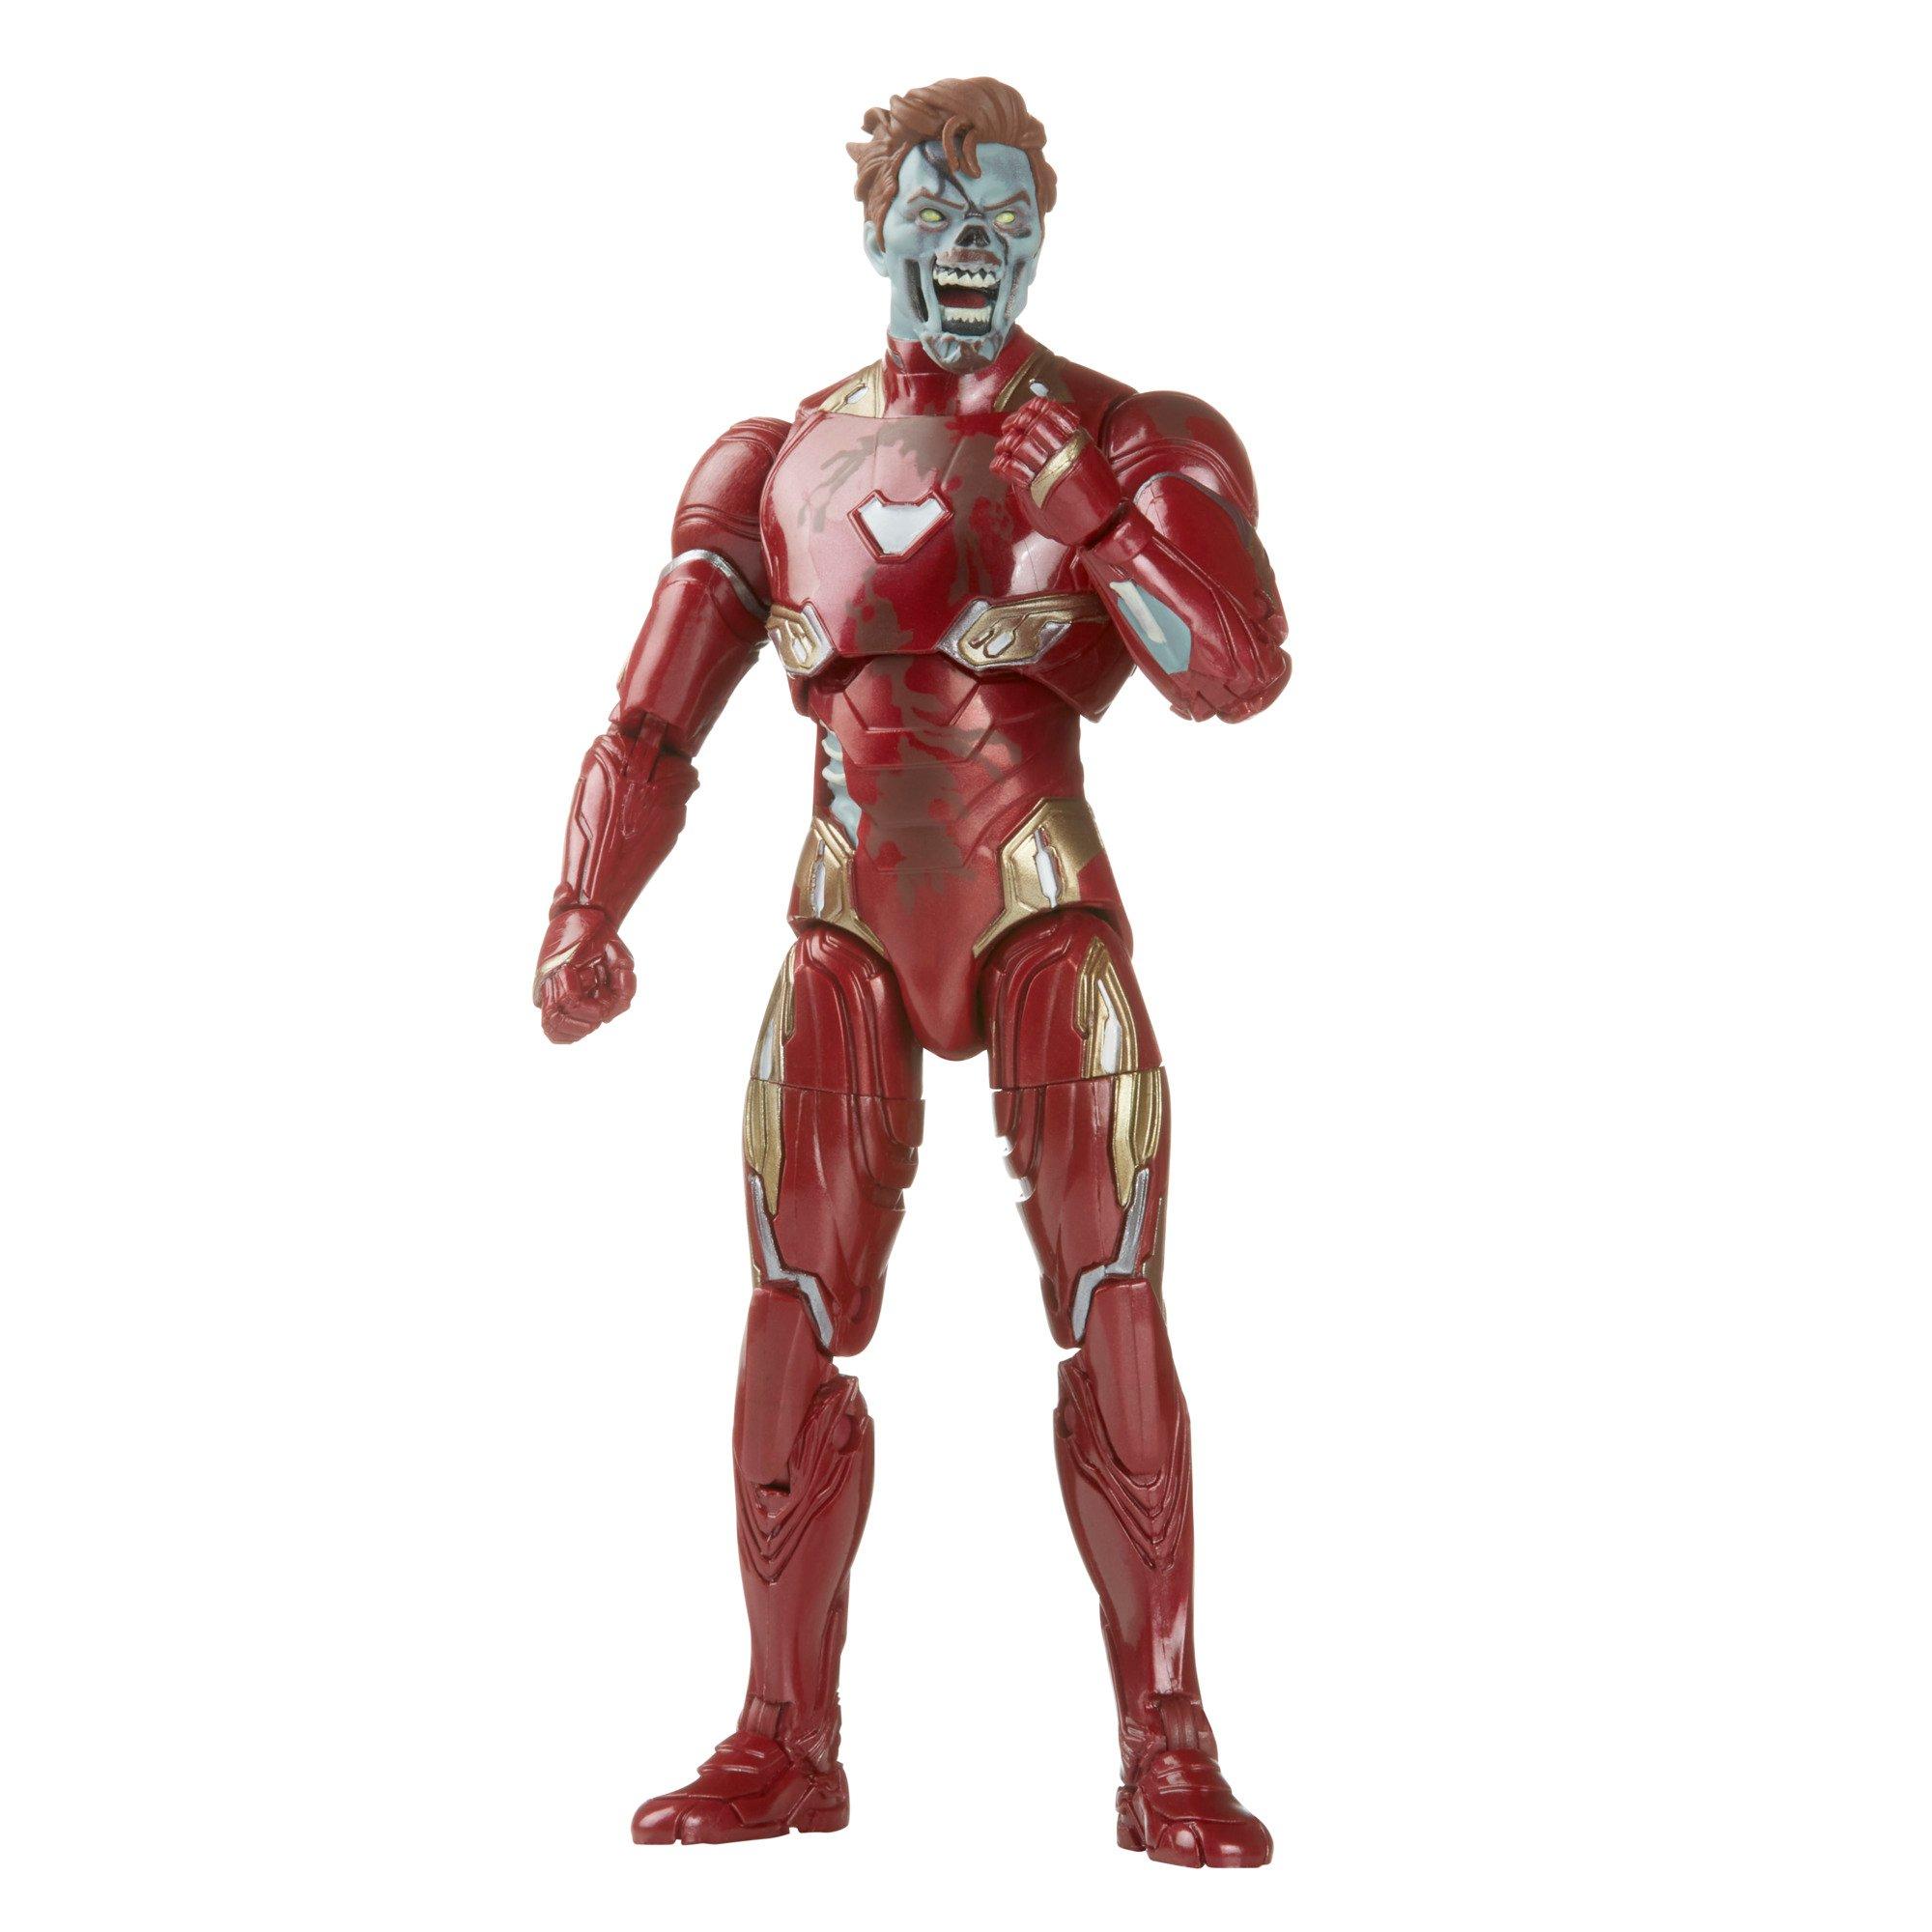 Hasbro Marvel Legends Series What If...? Zombie Iron Man 6-in Action Figure